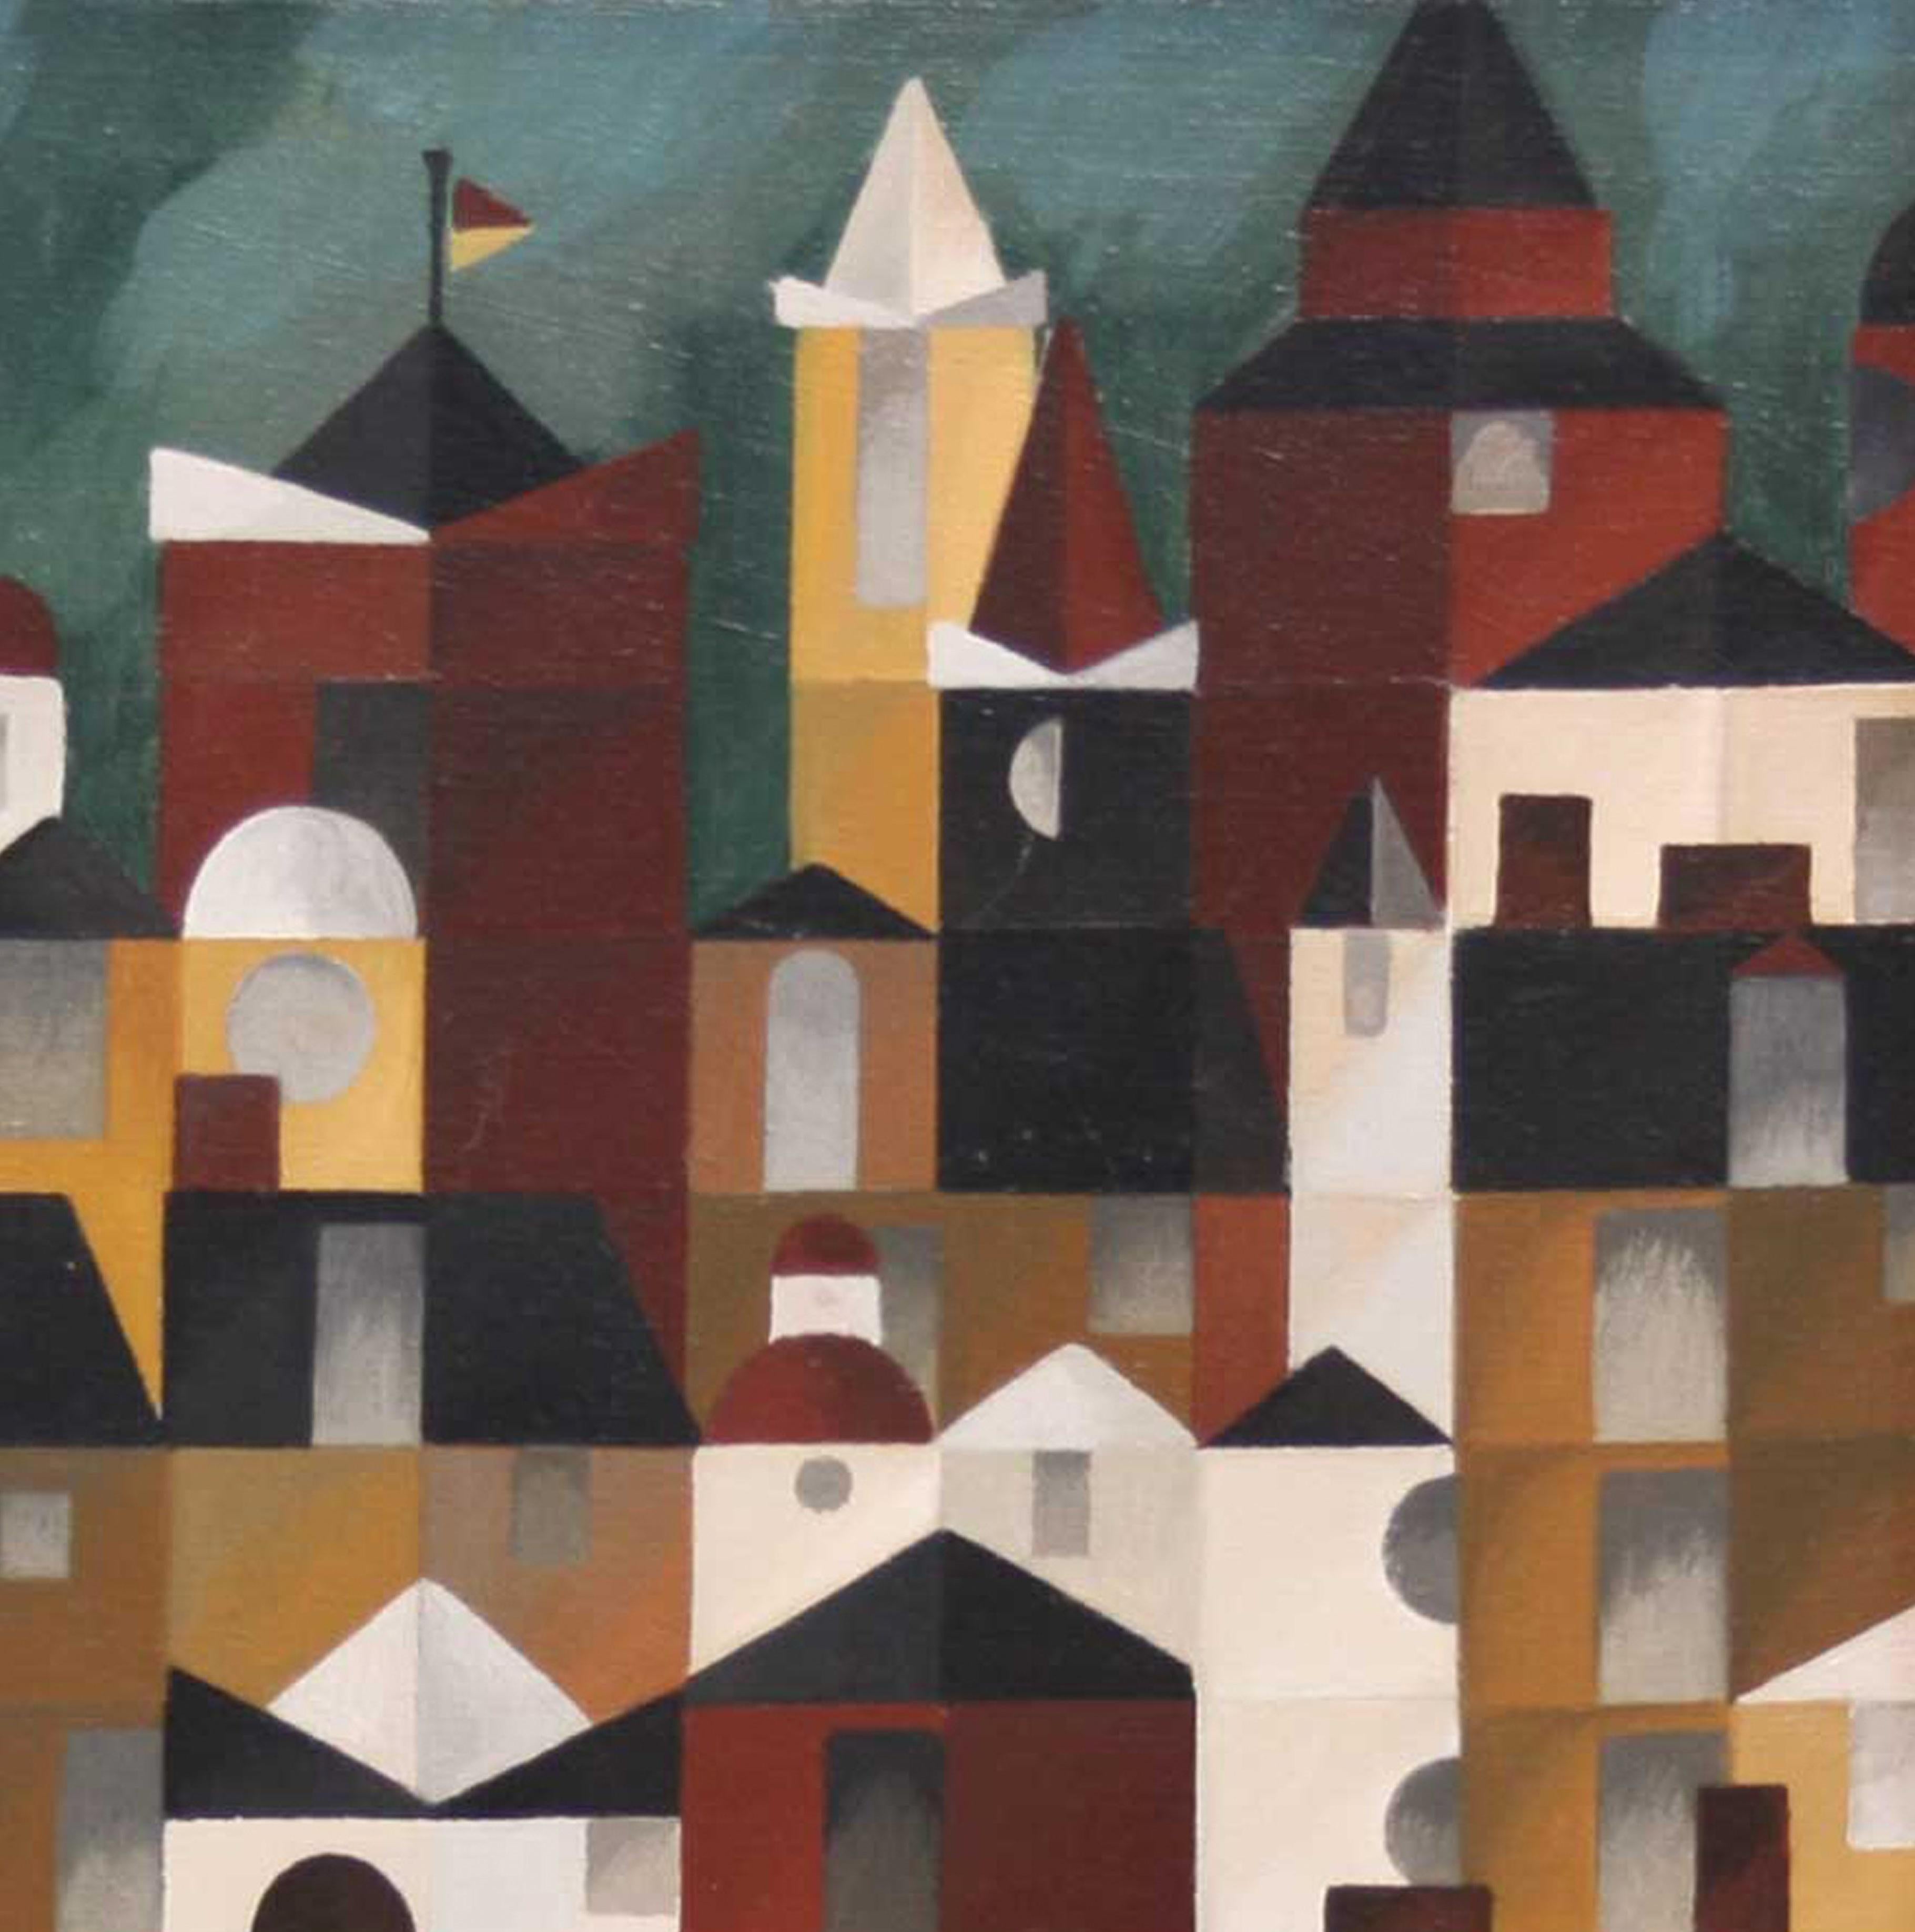 Dächer und Türme / Roofs and Towers - Painting by Helmut Verch